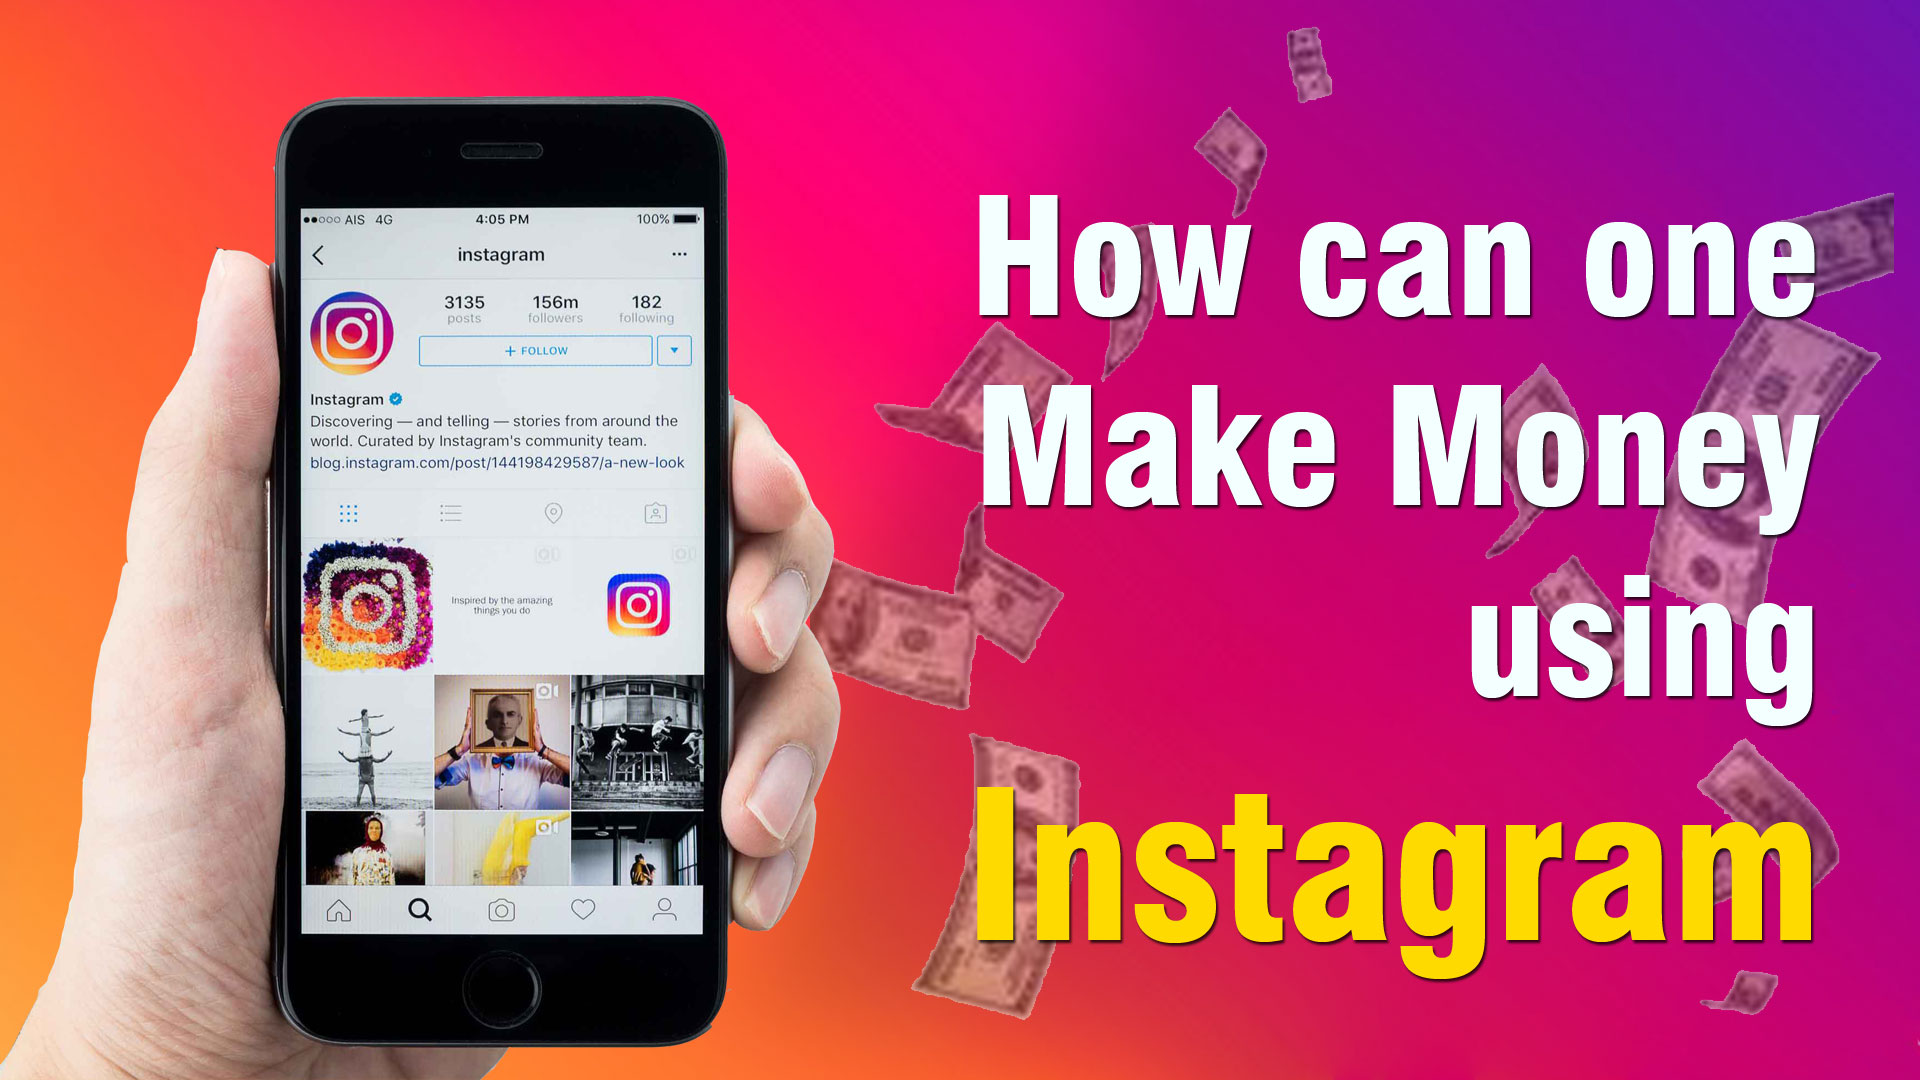 Flipping Instagram Pages Is A Quick Way To Make Money